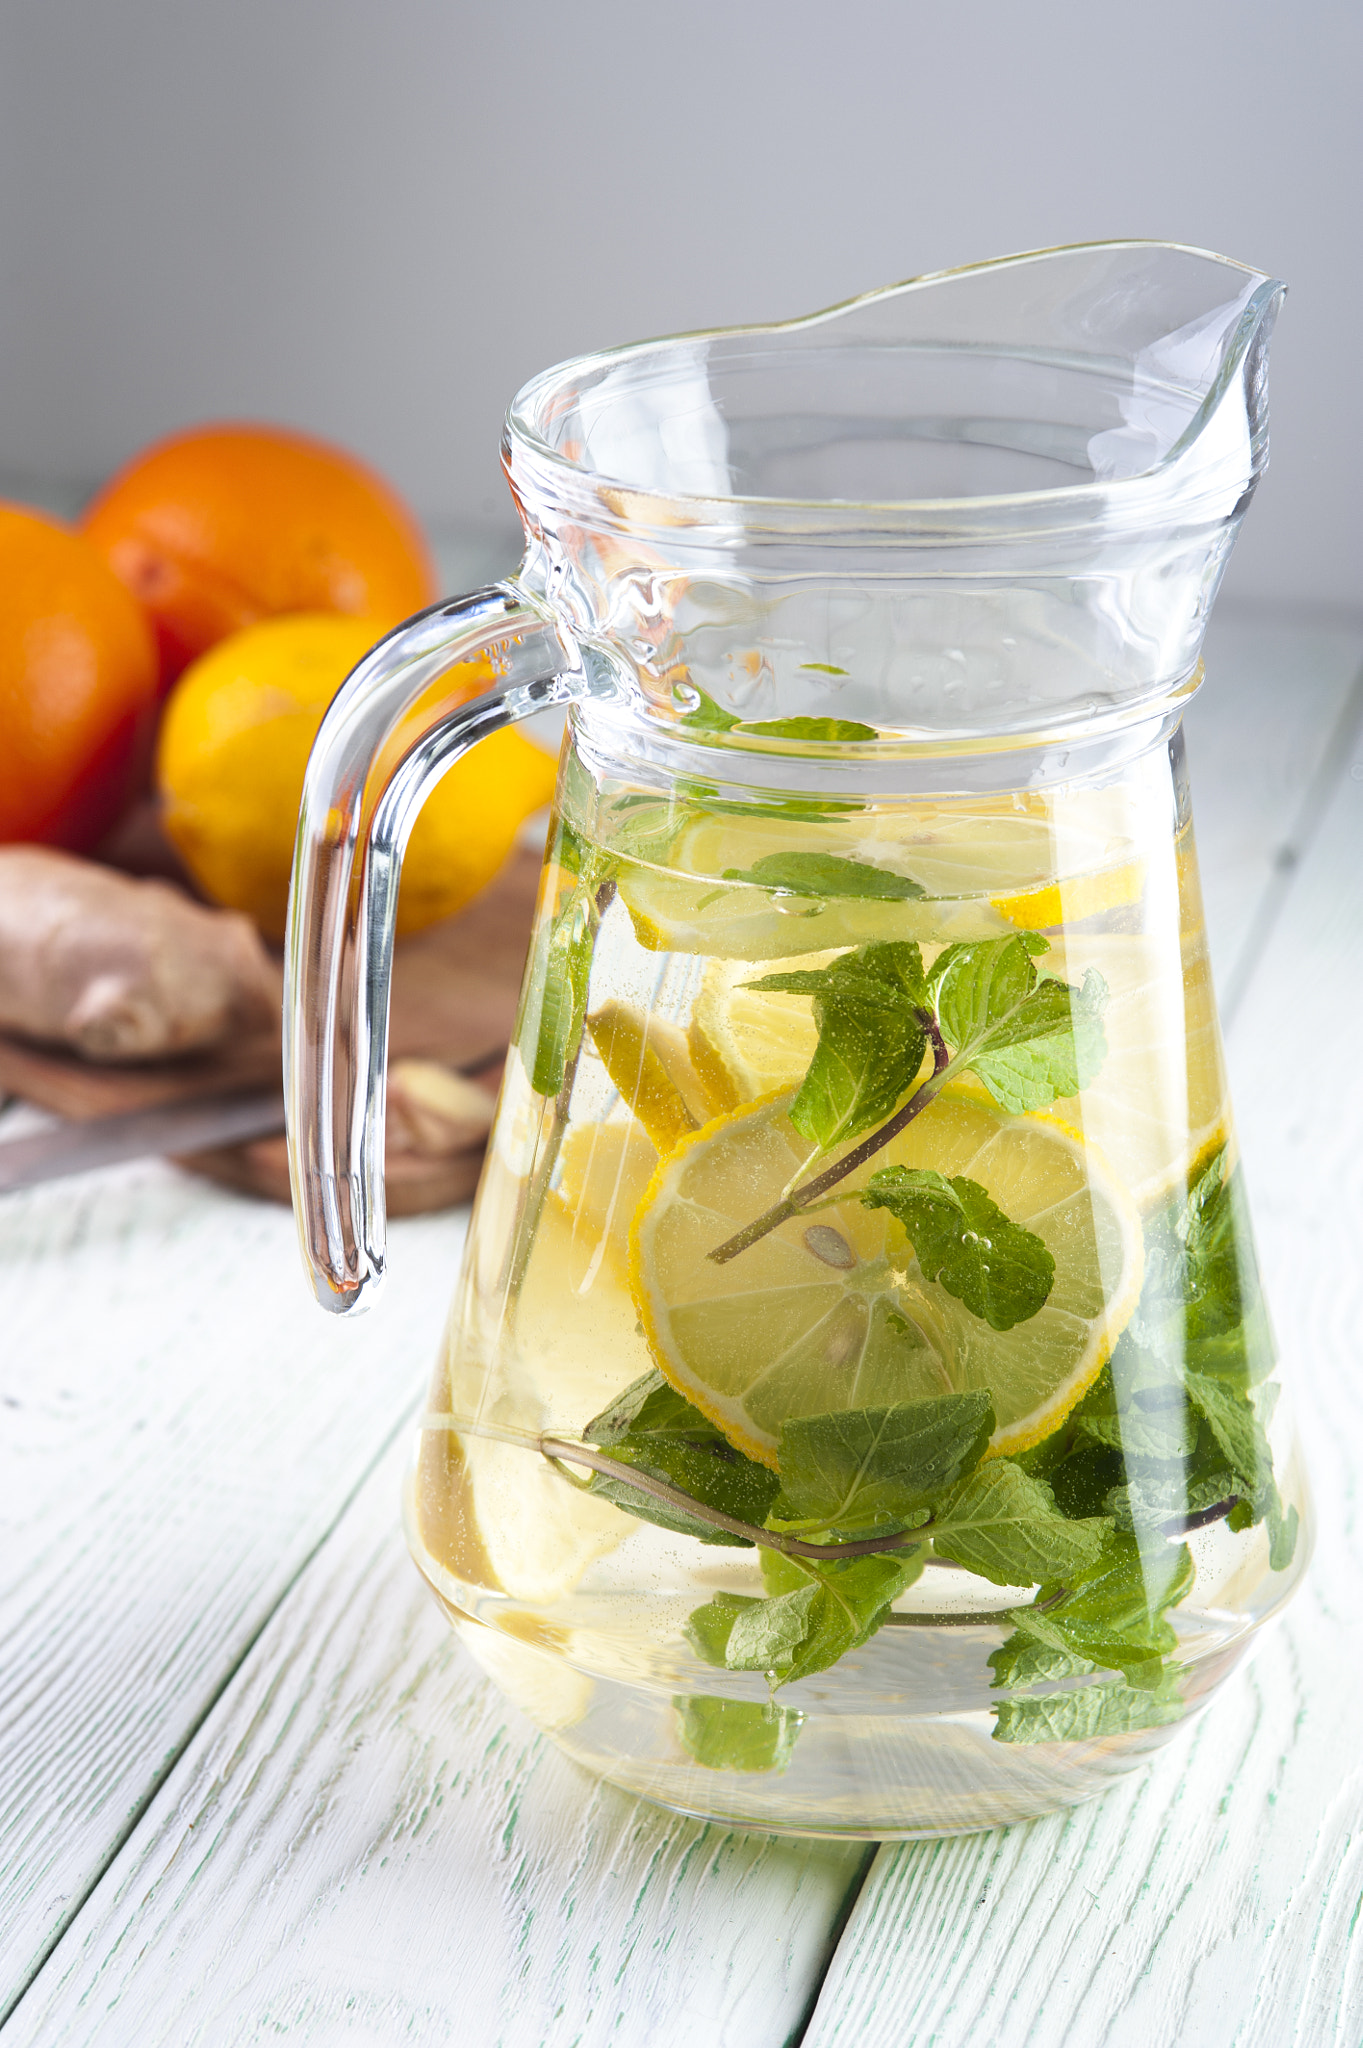 Nikon D700 + AF Micro-Nikkor 105mm f/2.8 sample photo. Detox water with lemon and mint in glass jug photography